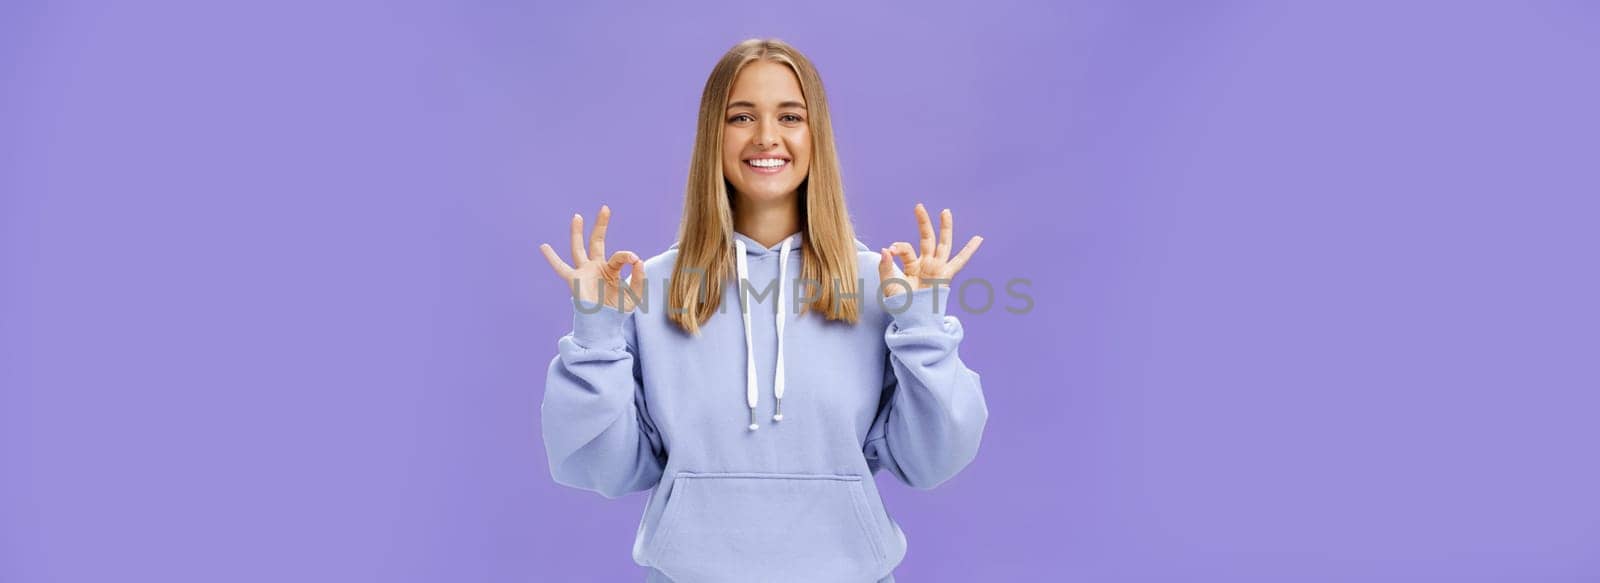 Girl got everything under control. Delighted happy charming woman with fair hair and tanned skin without makeup showing okay gesture smiling assured and pleased posing in hoodie over purple wall.